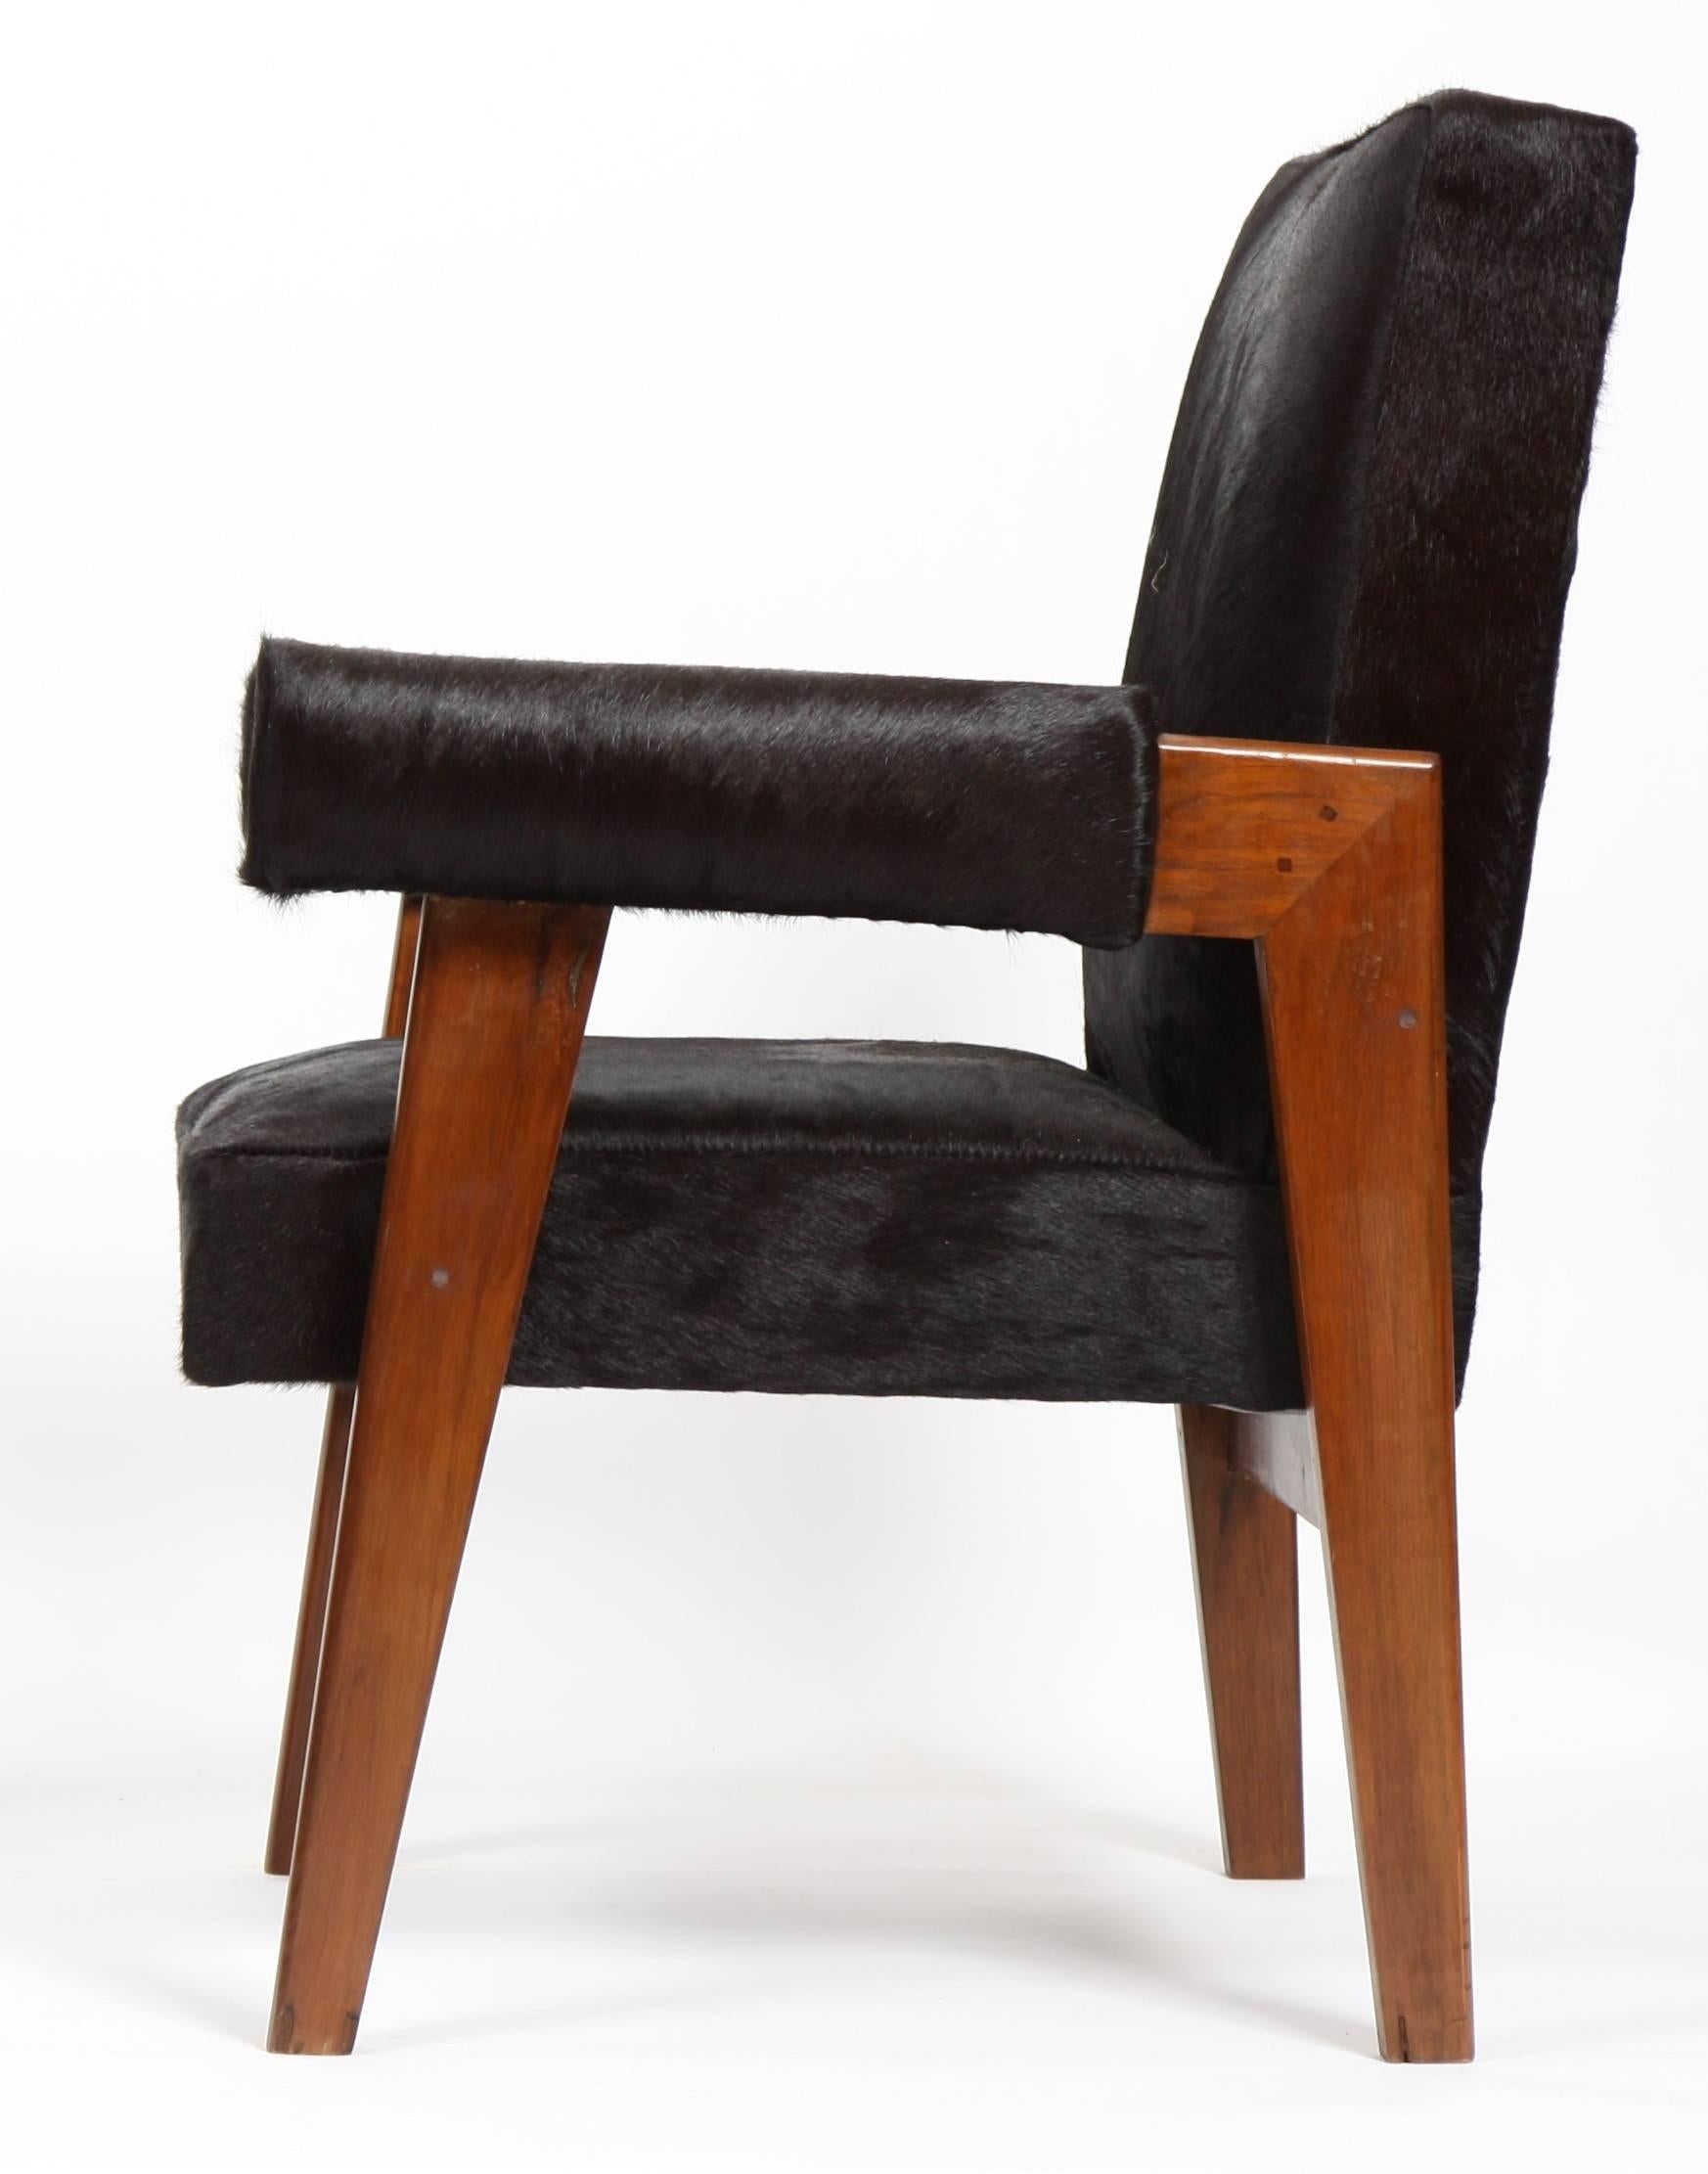 Le Corbusier (1887-1965) - Pierre Jeanneret (1896-1967)
Lawyer chair model teak armchair with a flat sloping back and lateral bridged legs.
Detached armrests with rounder cuffs. Seat, back and cuffs covered with restored black hair black skin,
circa